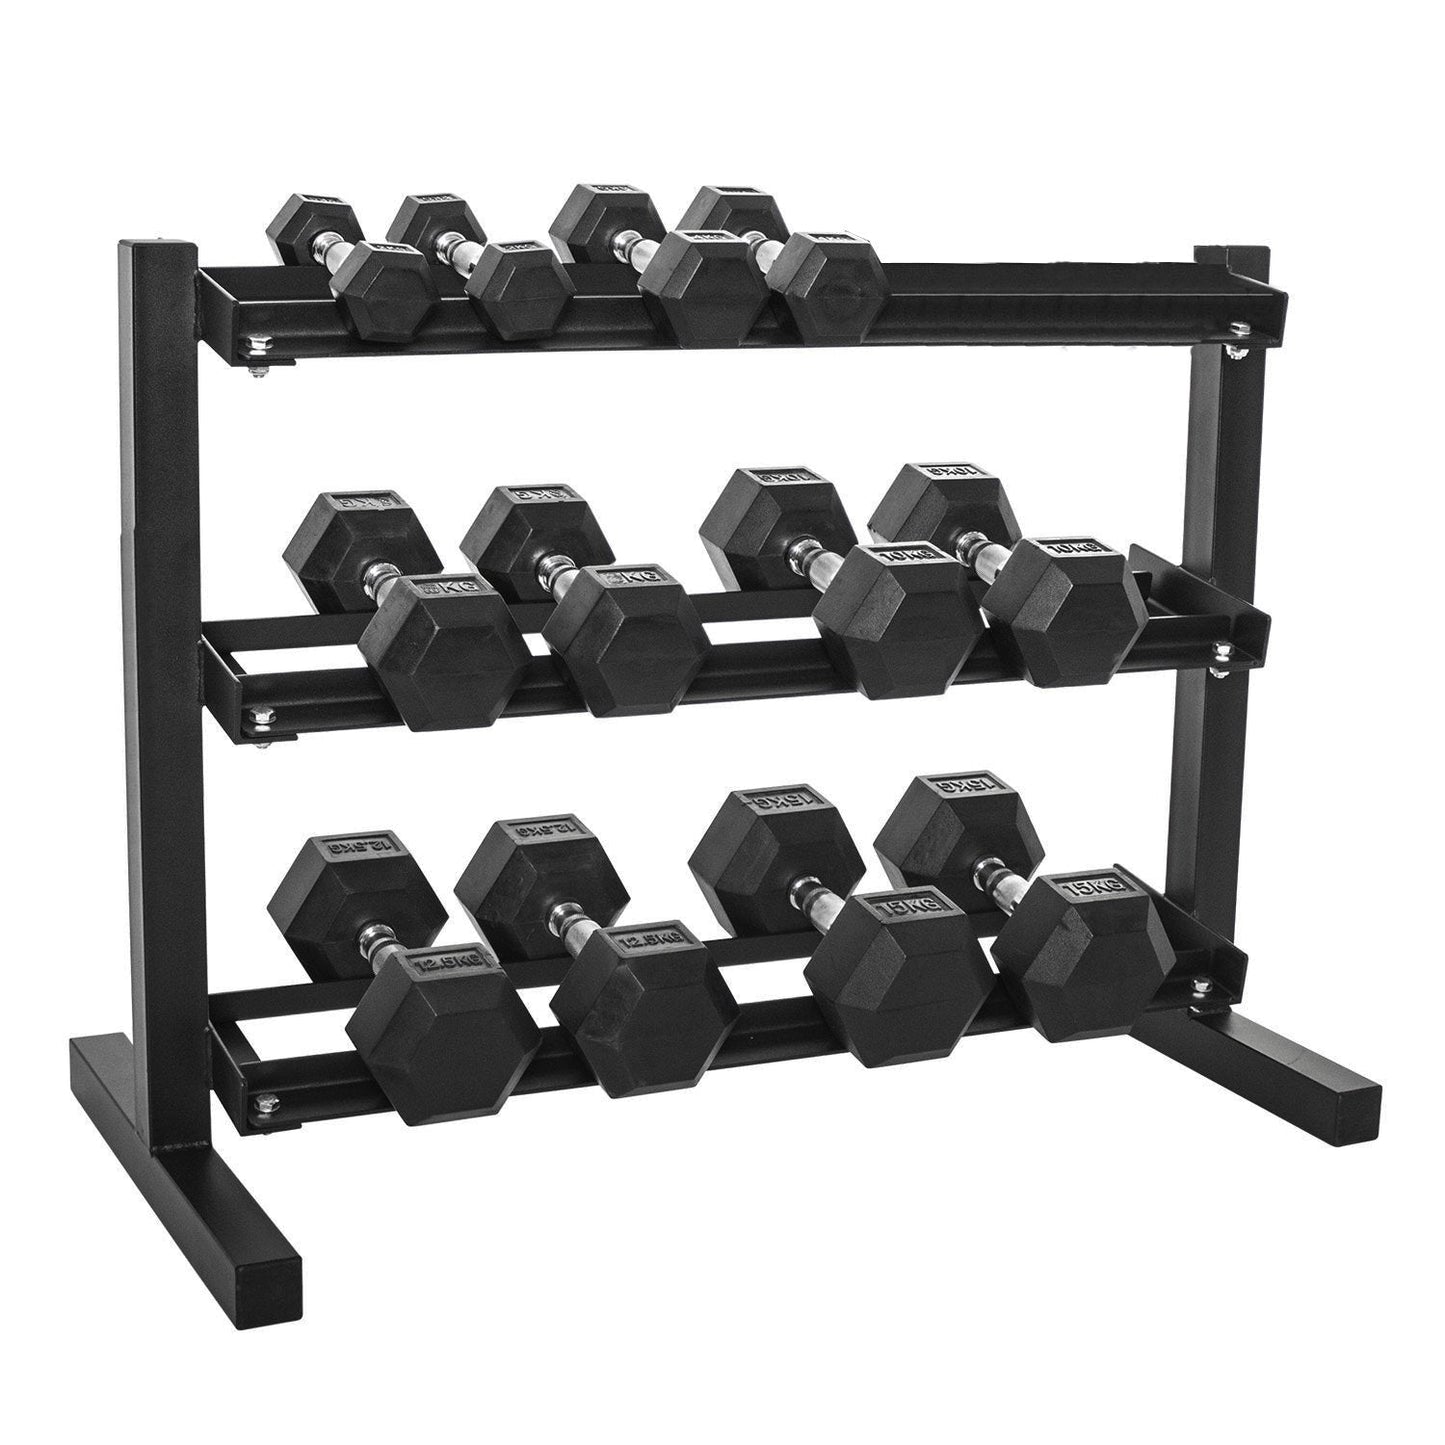 Combo Offer - Hex Dumbbell Set 2.5 Kg to 15 Kg with 3 Tier Rack + Flat Bench A0011